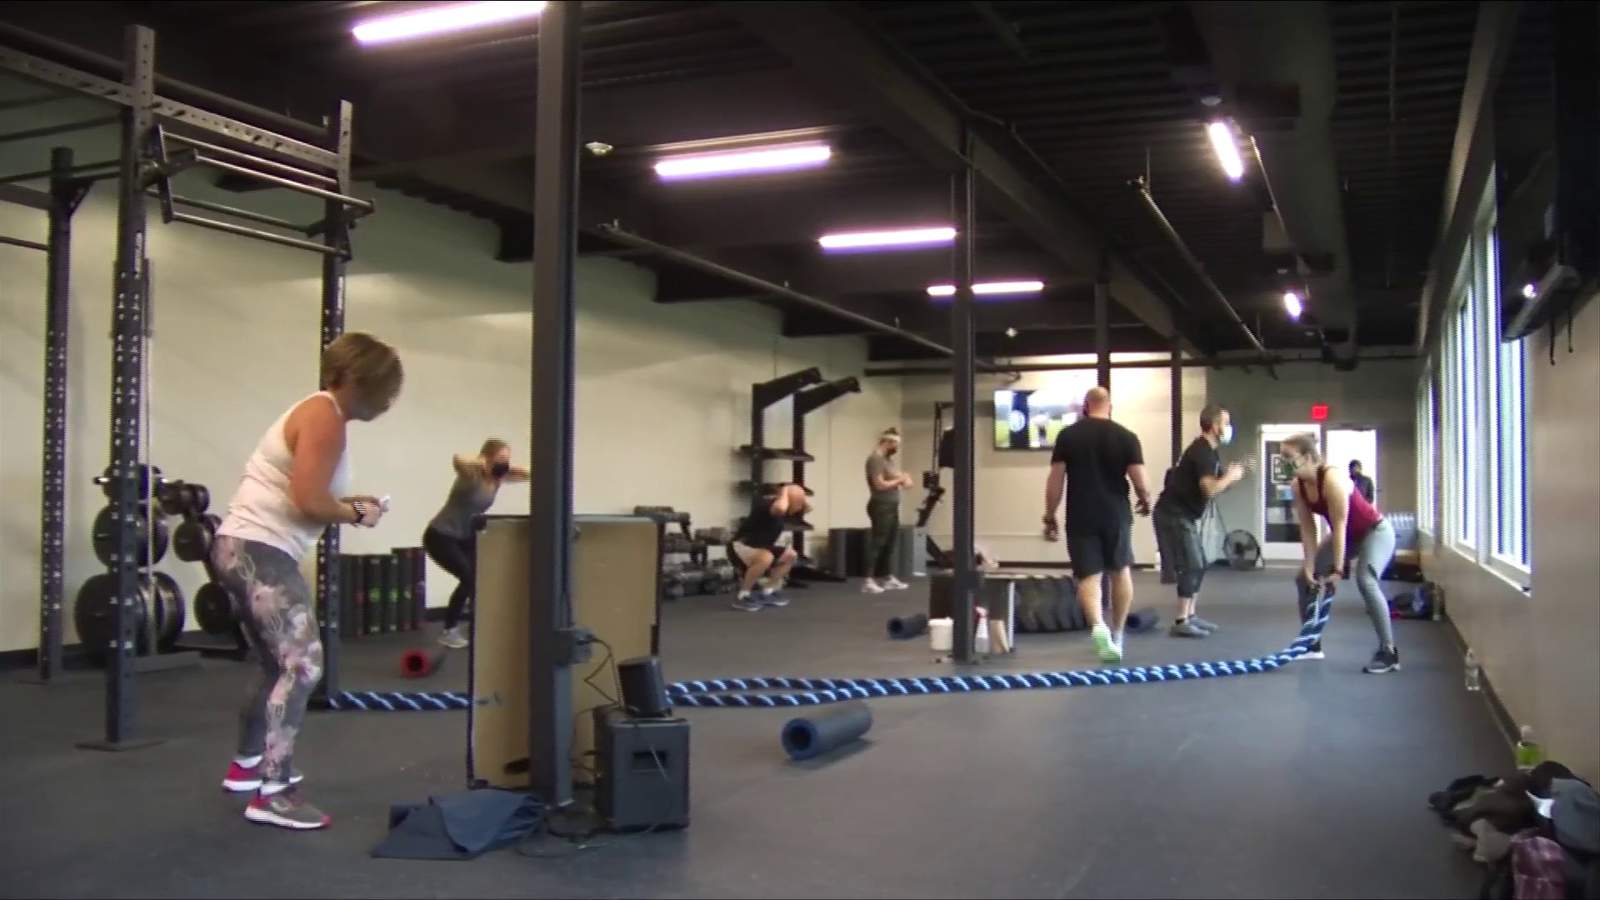 Roanoke gym studio opens just in time for New Year’s fitness resolutions